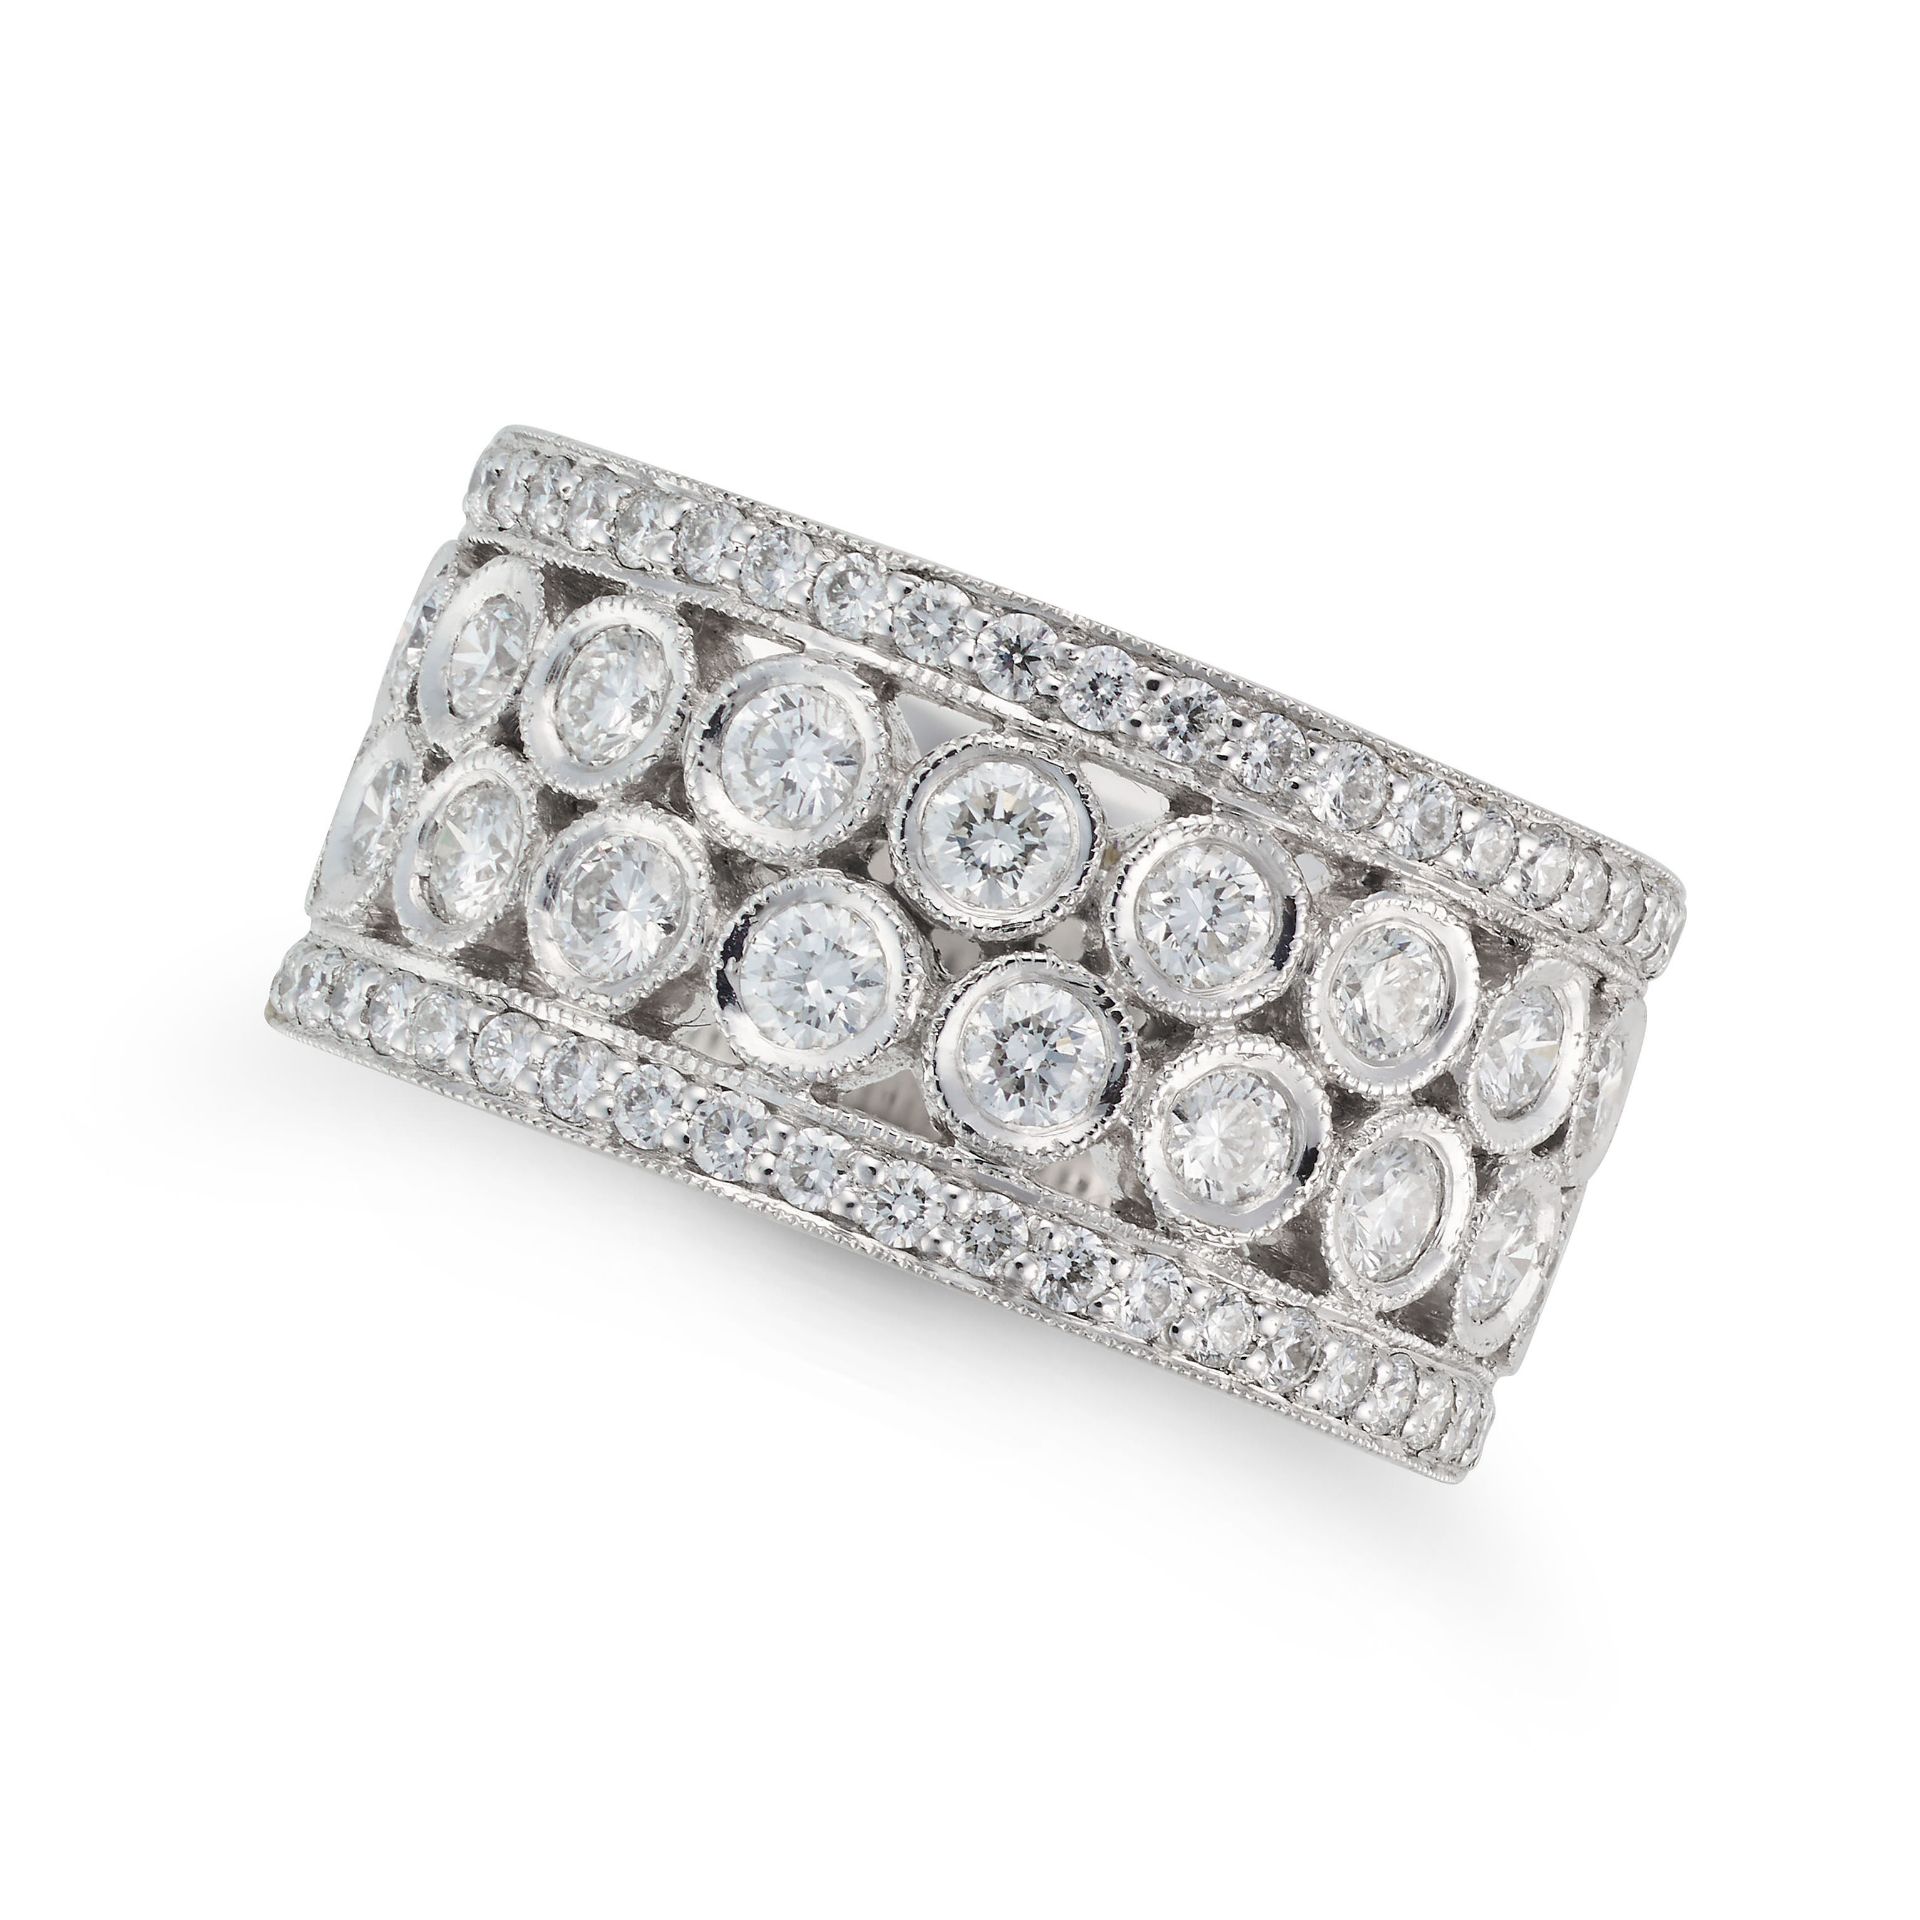 A DIAMOND RING in platinum, the openwork ring set with two rows of round brilliant cut diamonds, ...